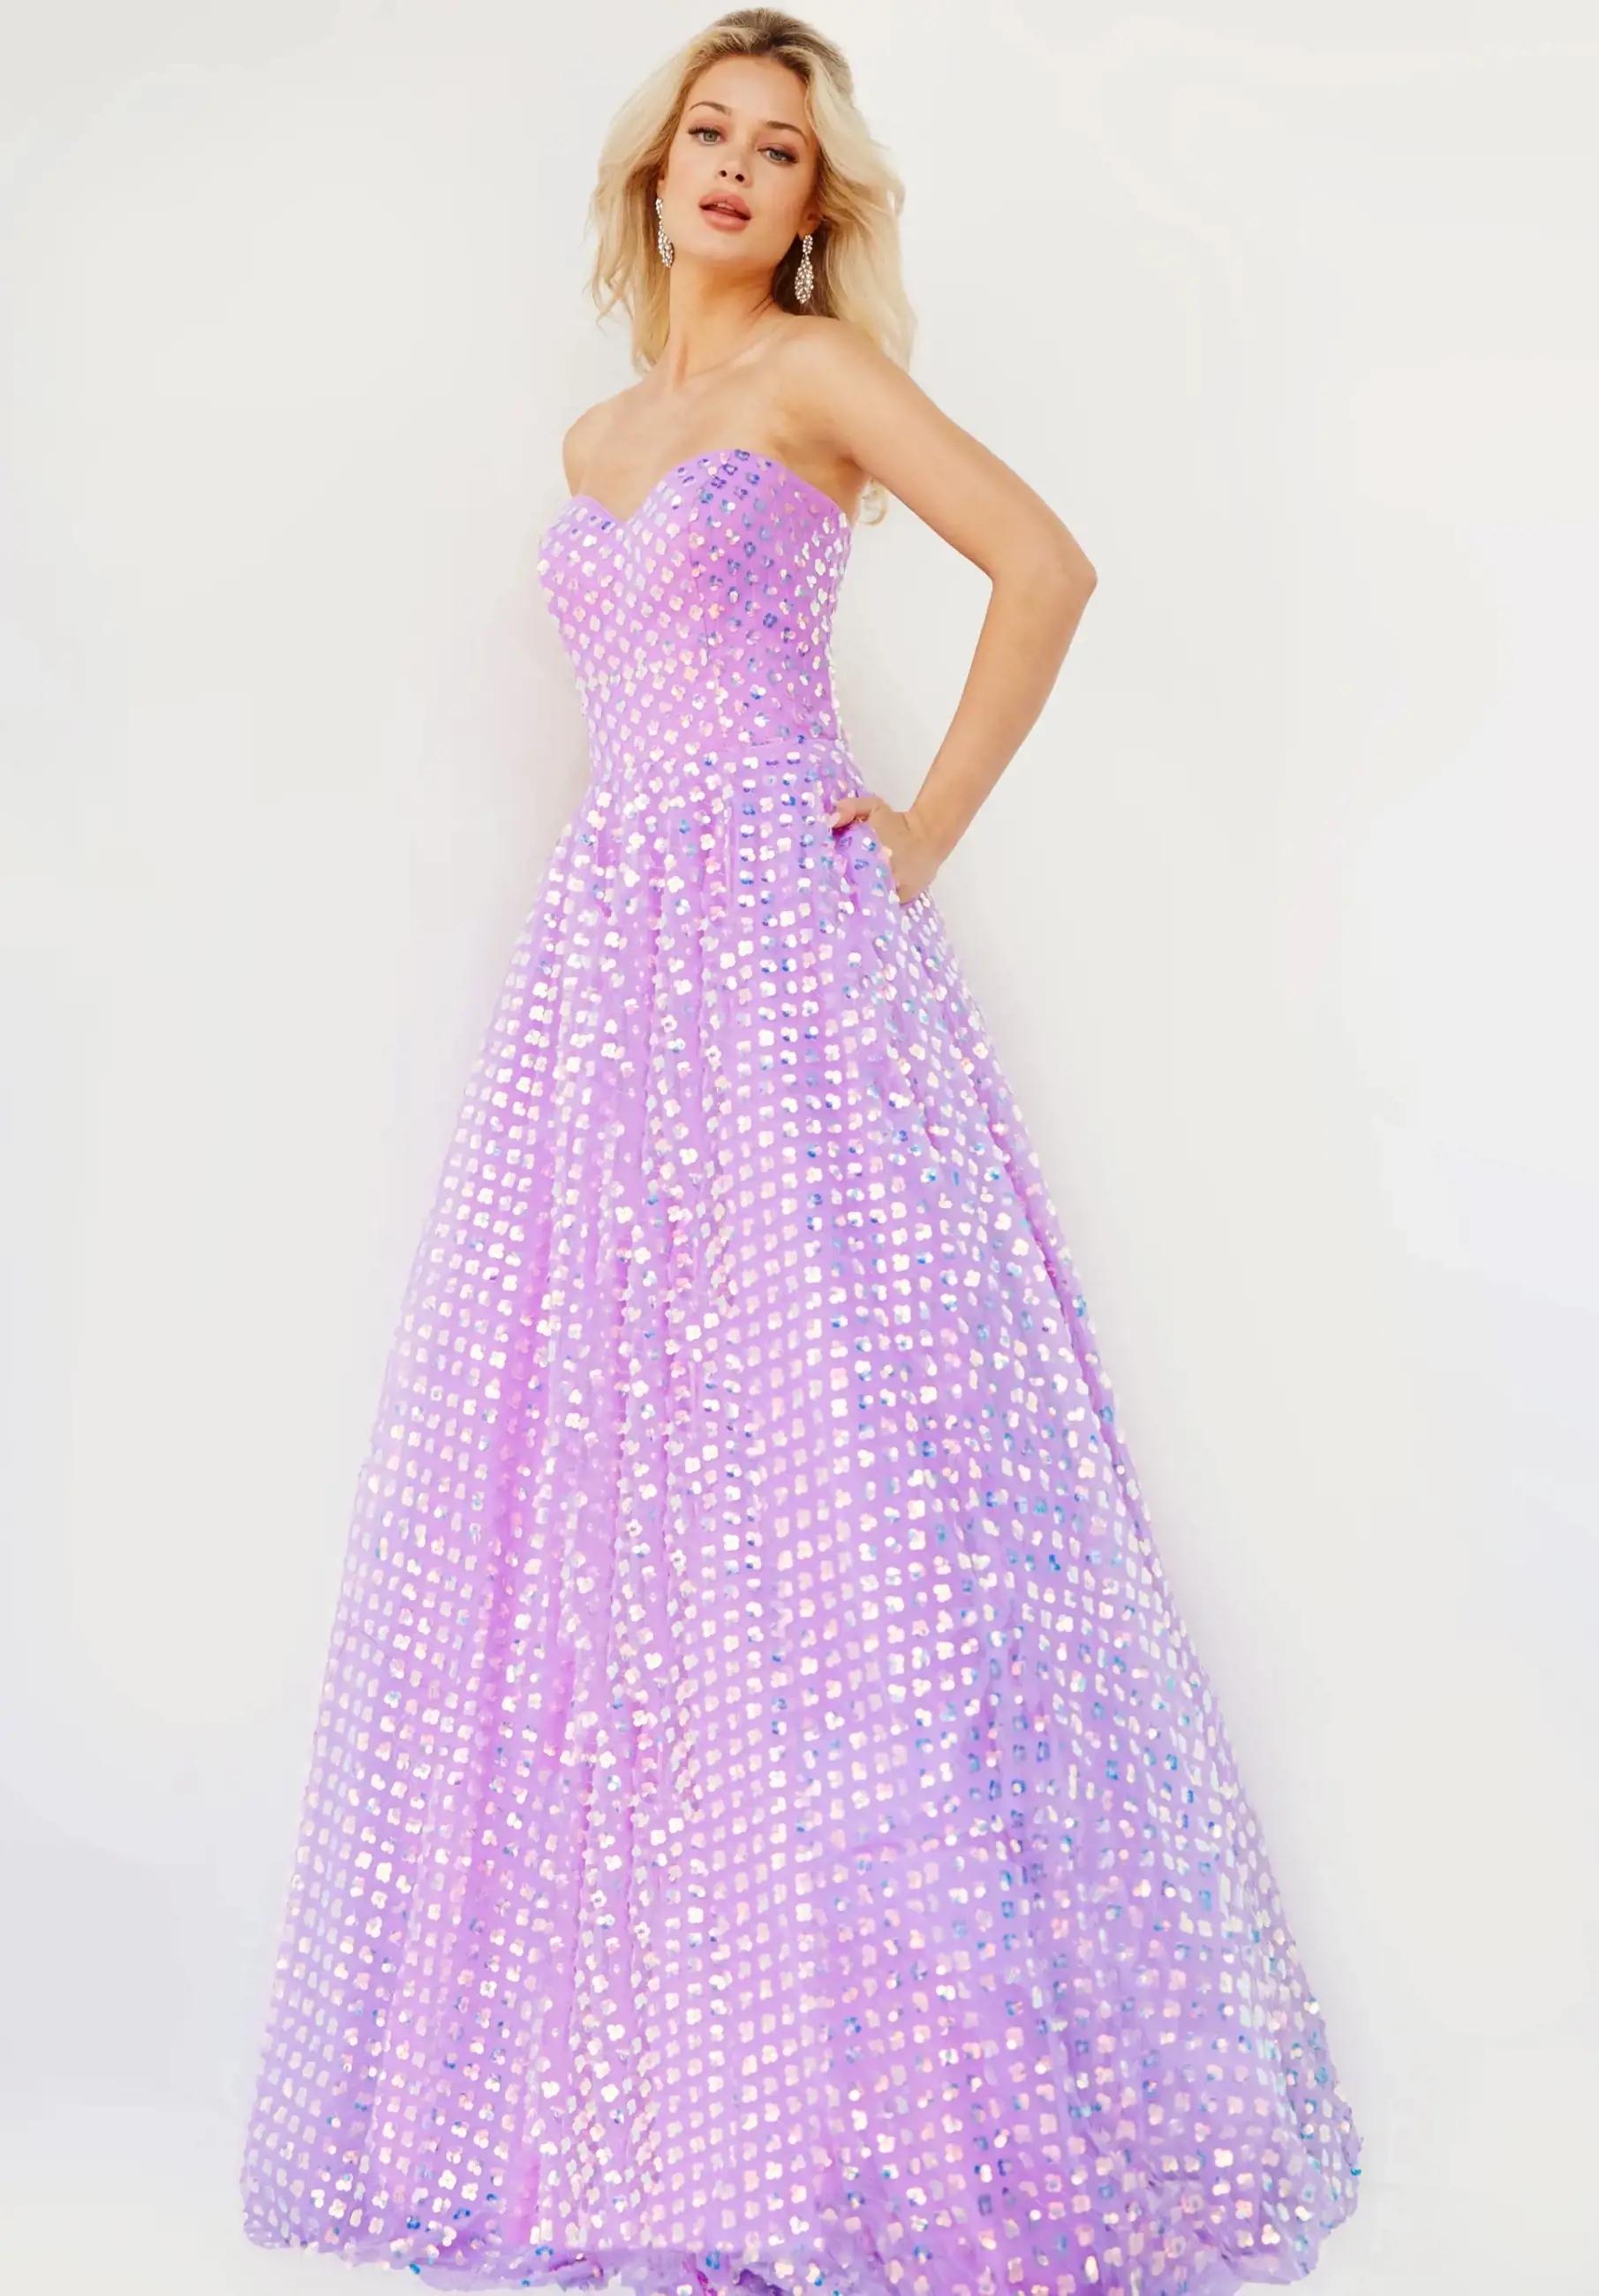 Unique 2023 Prom Dresses: Stand Out at Prom Image